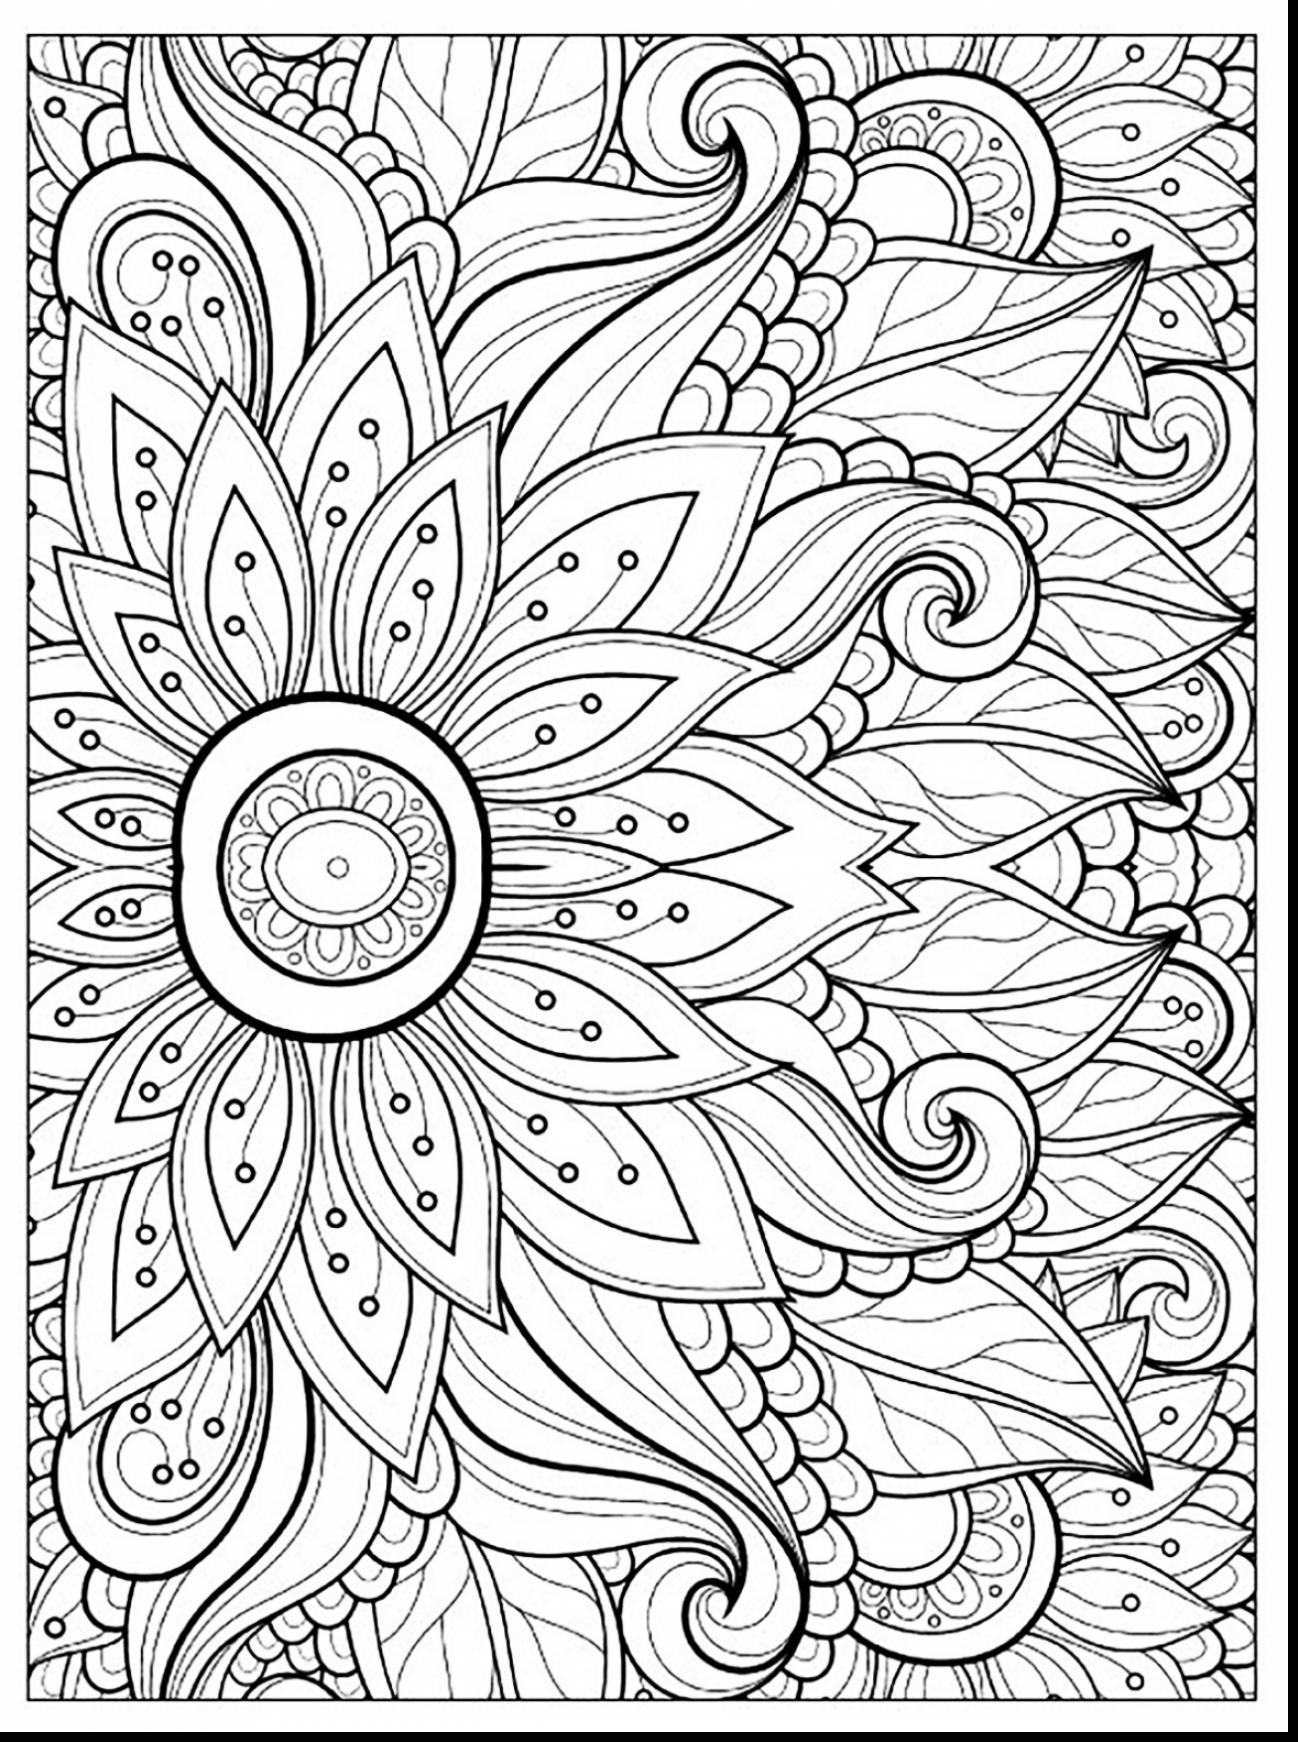 Adult Free Coloring Pages Flower Coloring Pages For Adults Unique Flower Coloring Pages Adults Birijus Com